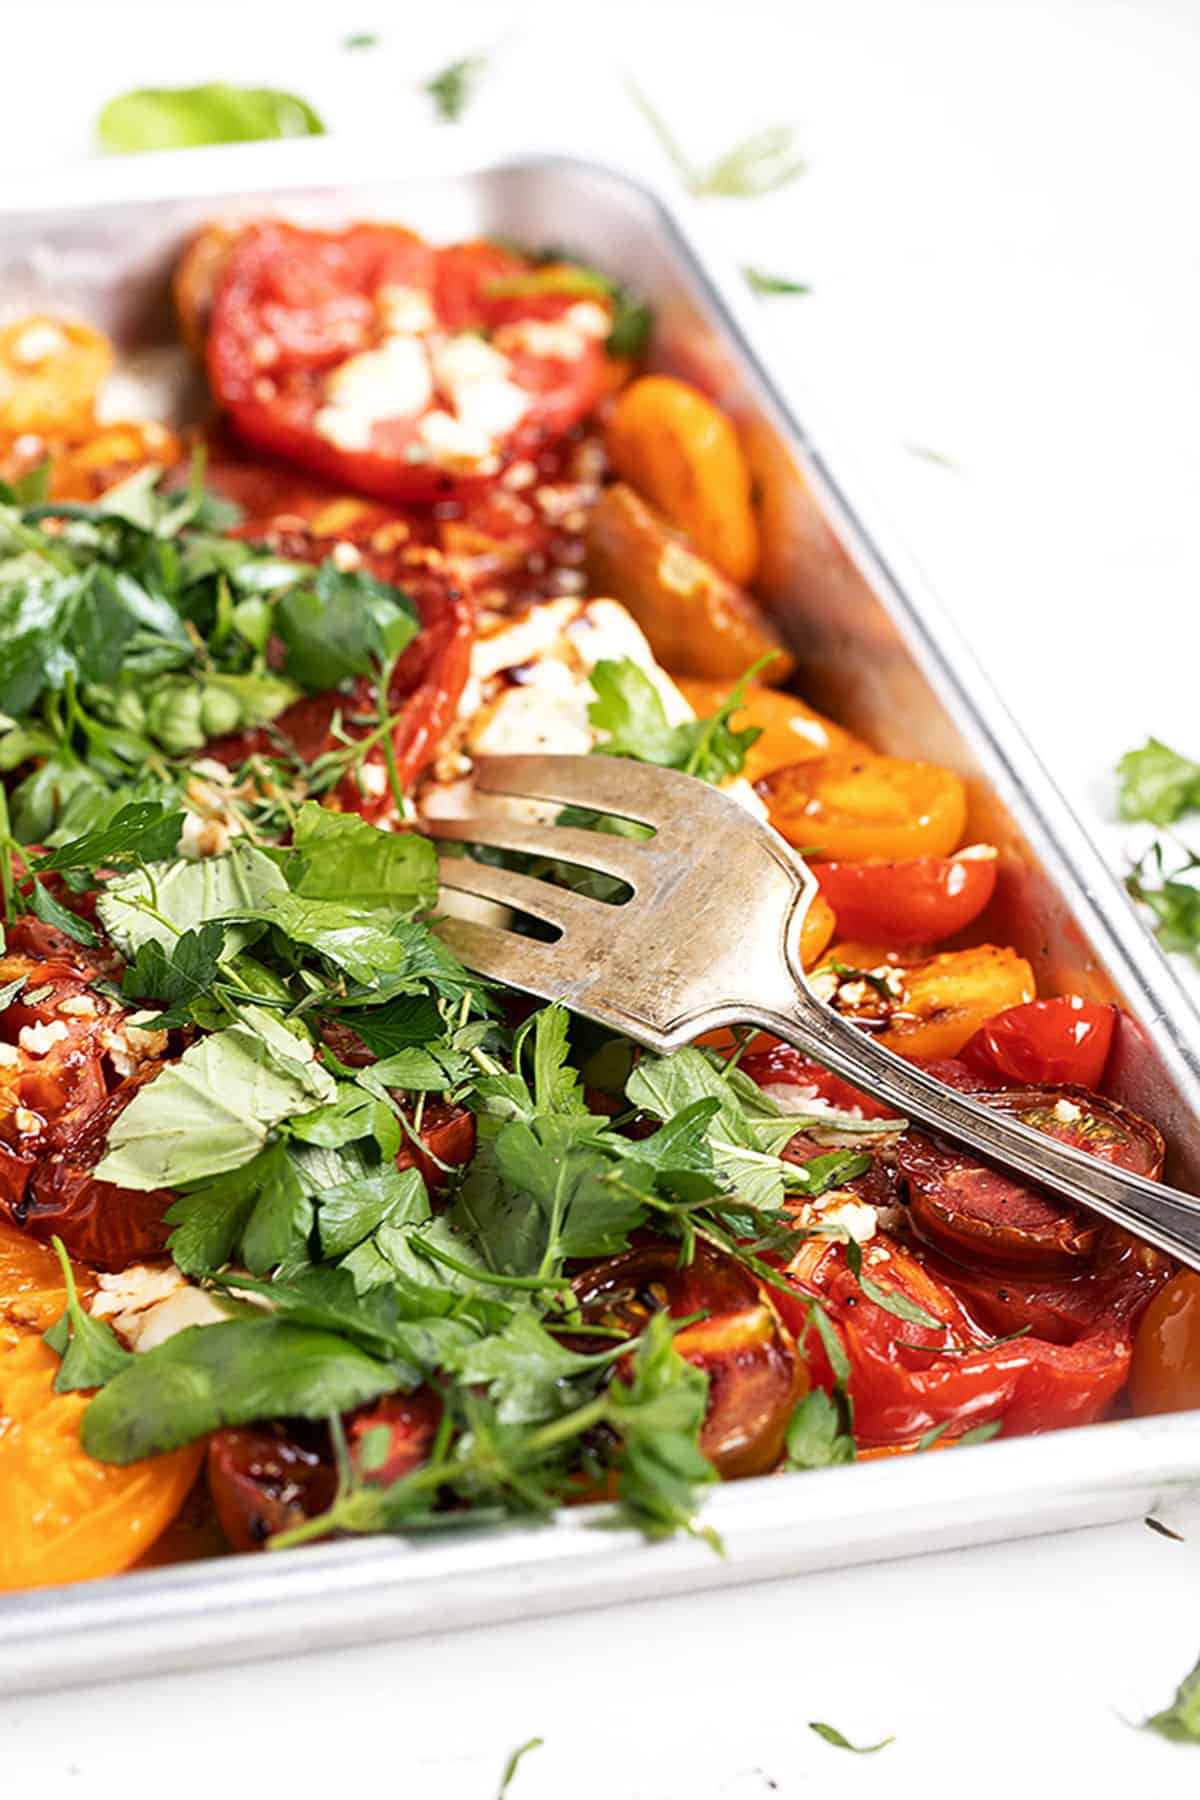 Roasted Heirloom Tomatoes with Feta and Herbs